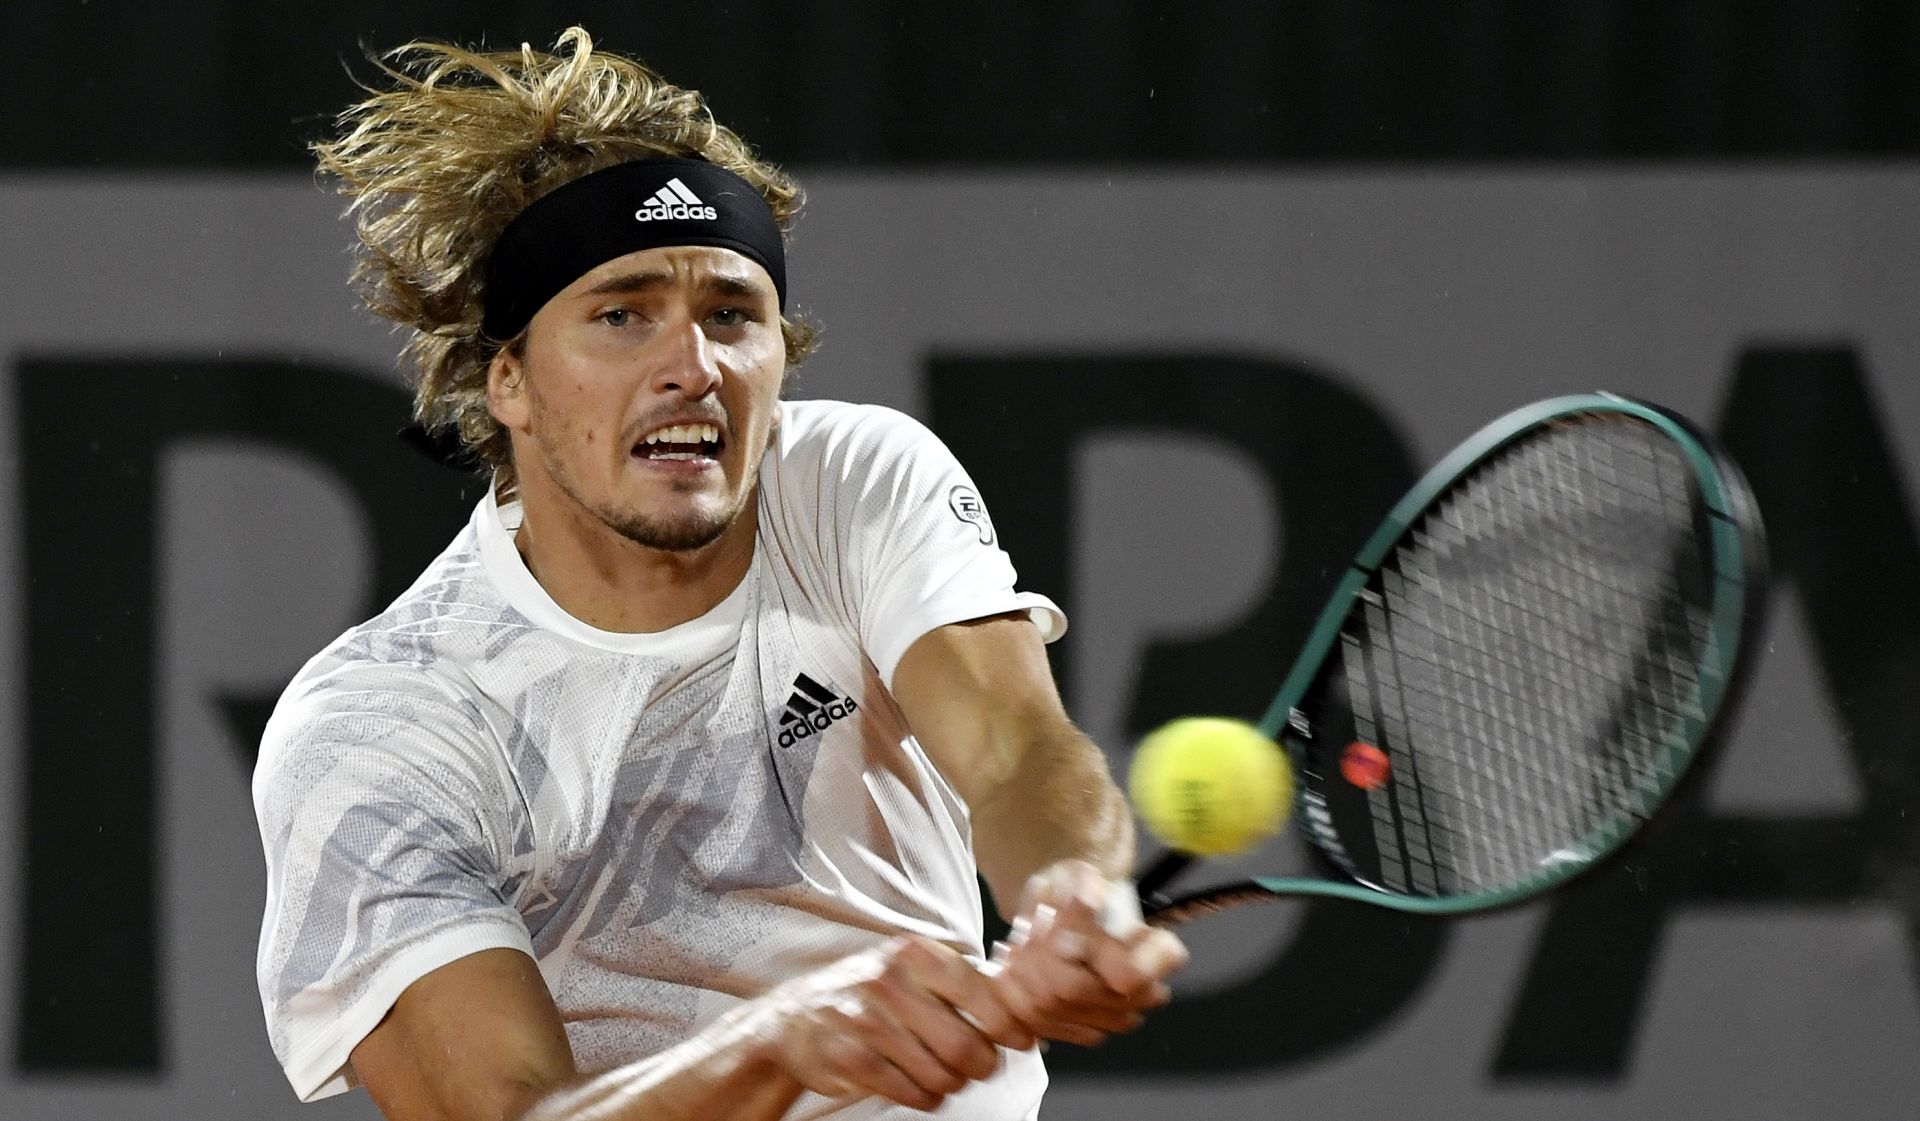 epa08716178 Alexander Zverev of Germany hits a backhand during his third round match against Marco Cecchinato of Italy at the French Open tennis tournament at Roland Garros in Paris, France, 02 October 2020.  EPA/JULIEN DE ROSA